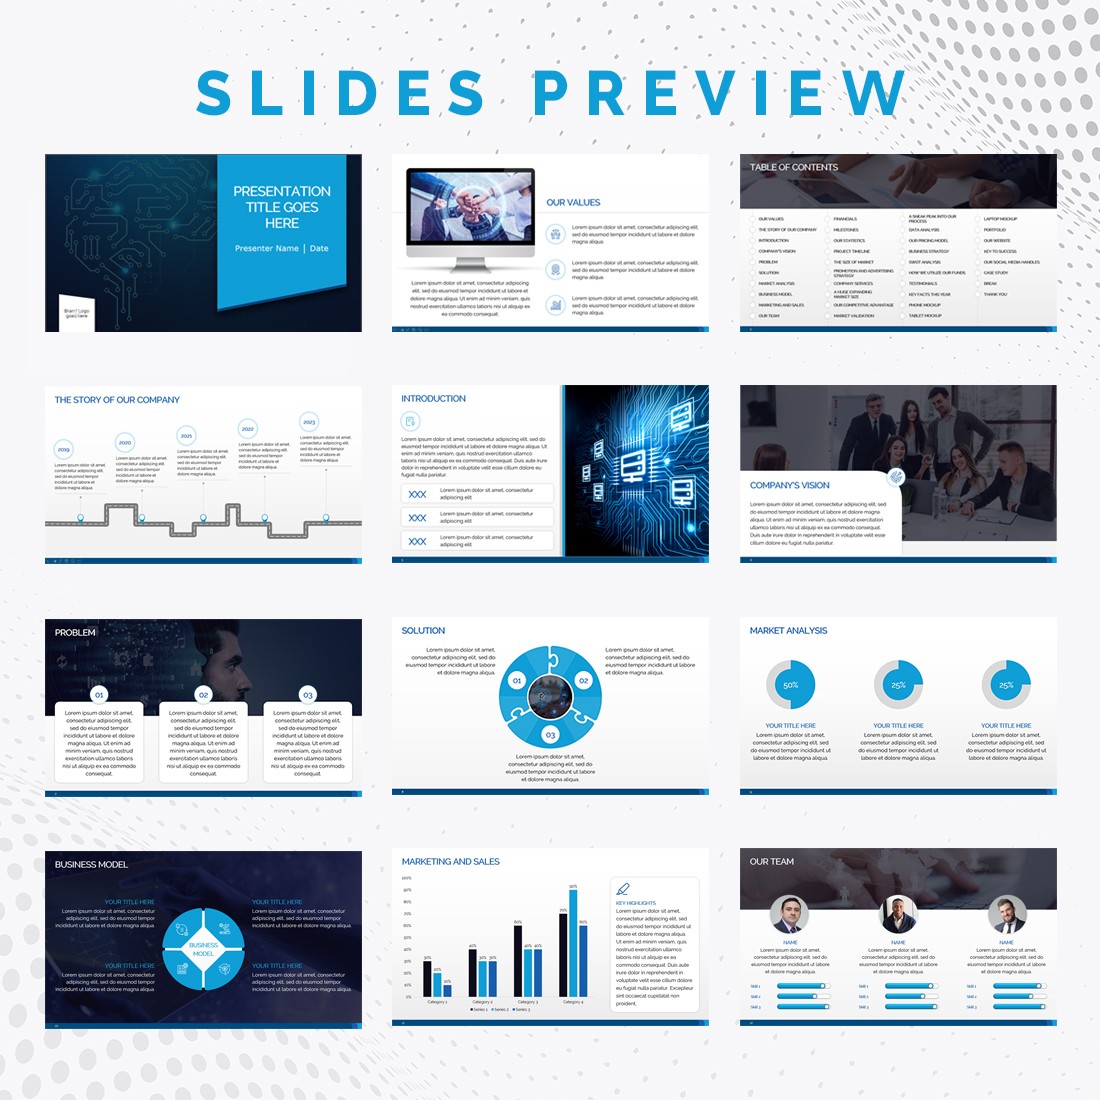 powerpoint pitch deck template